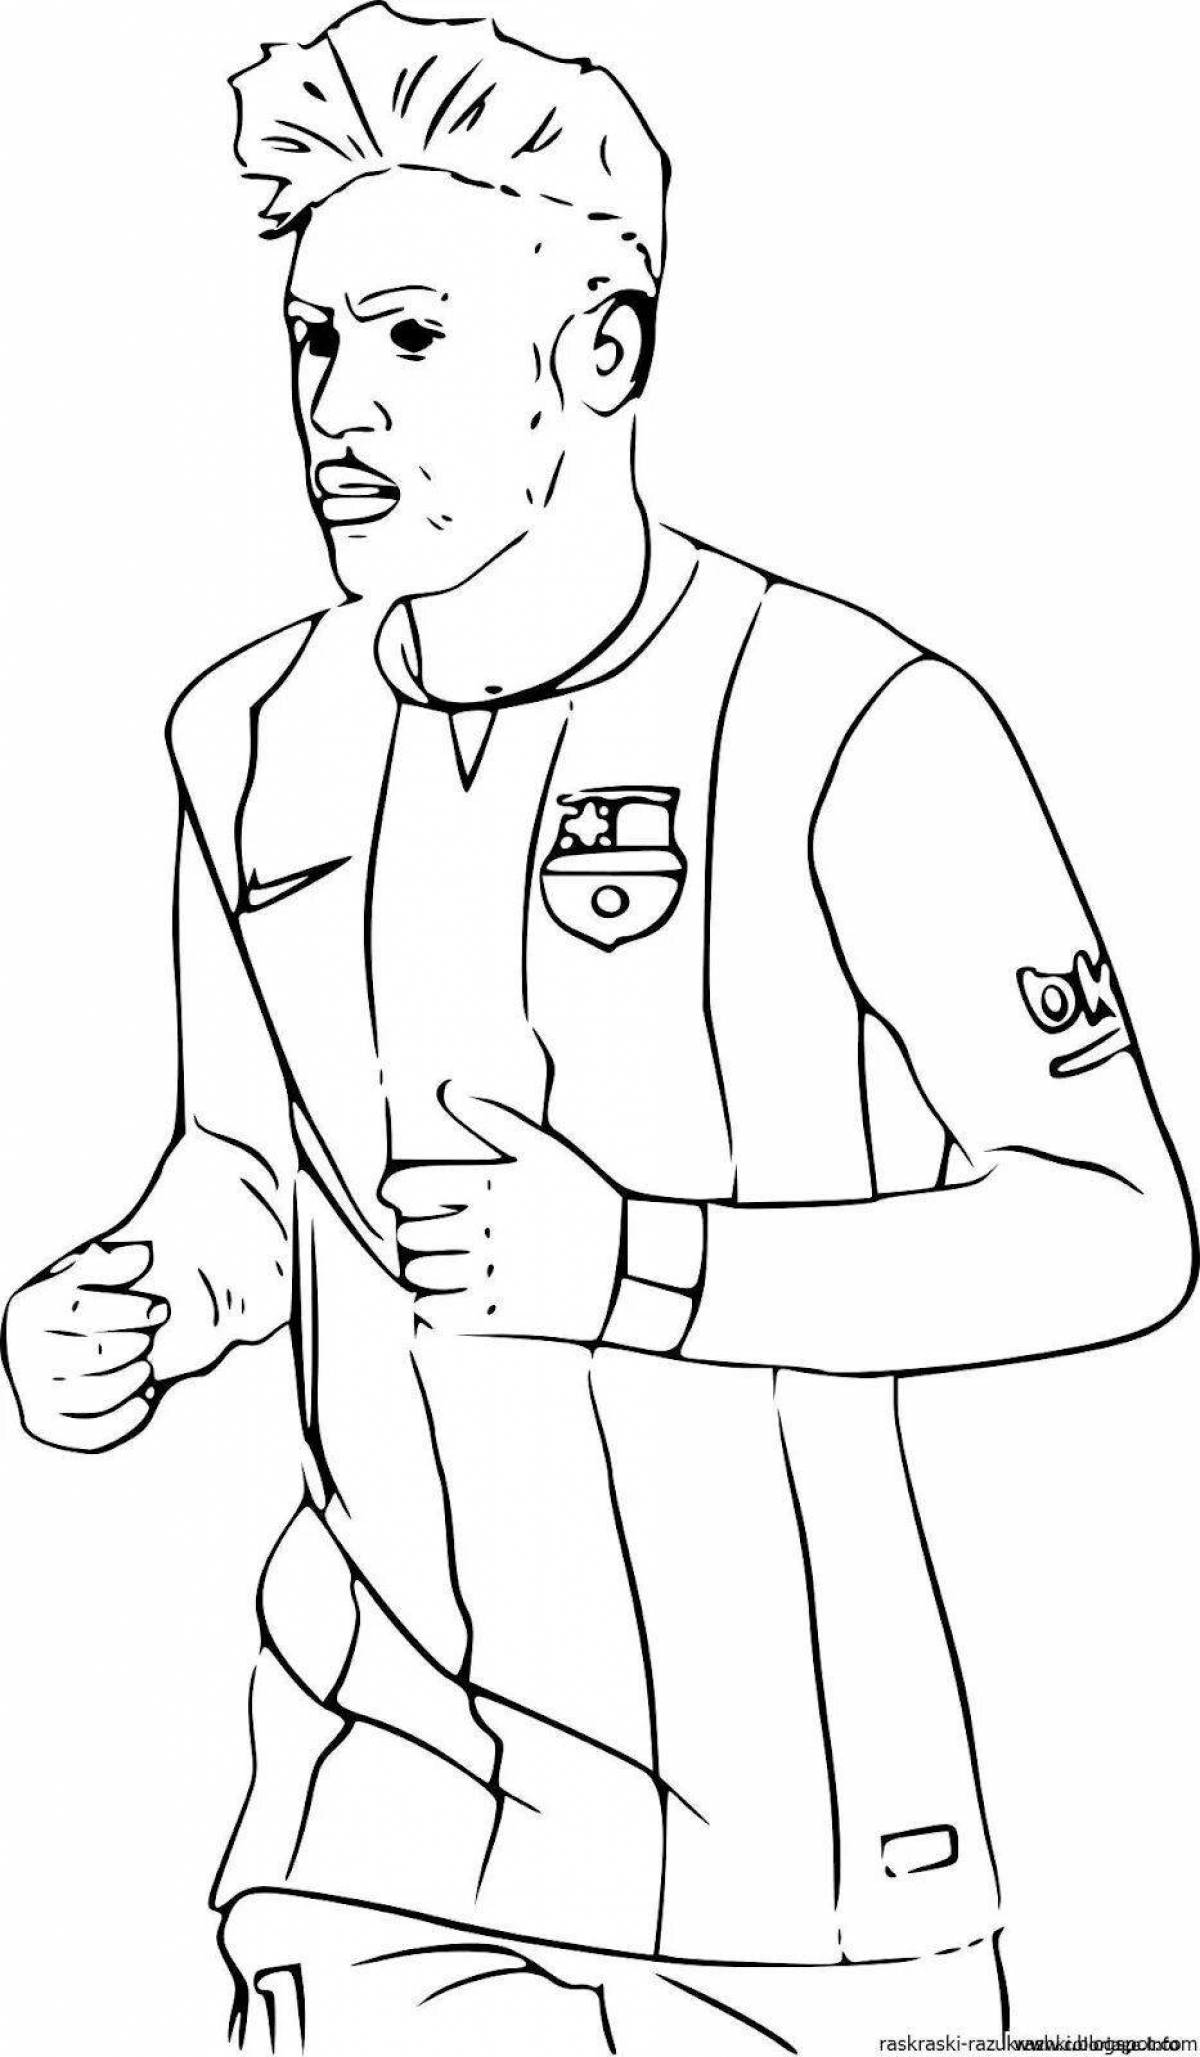 Colourful football players coloring page